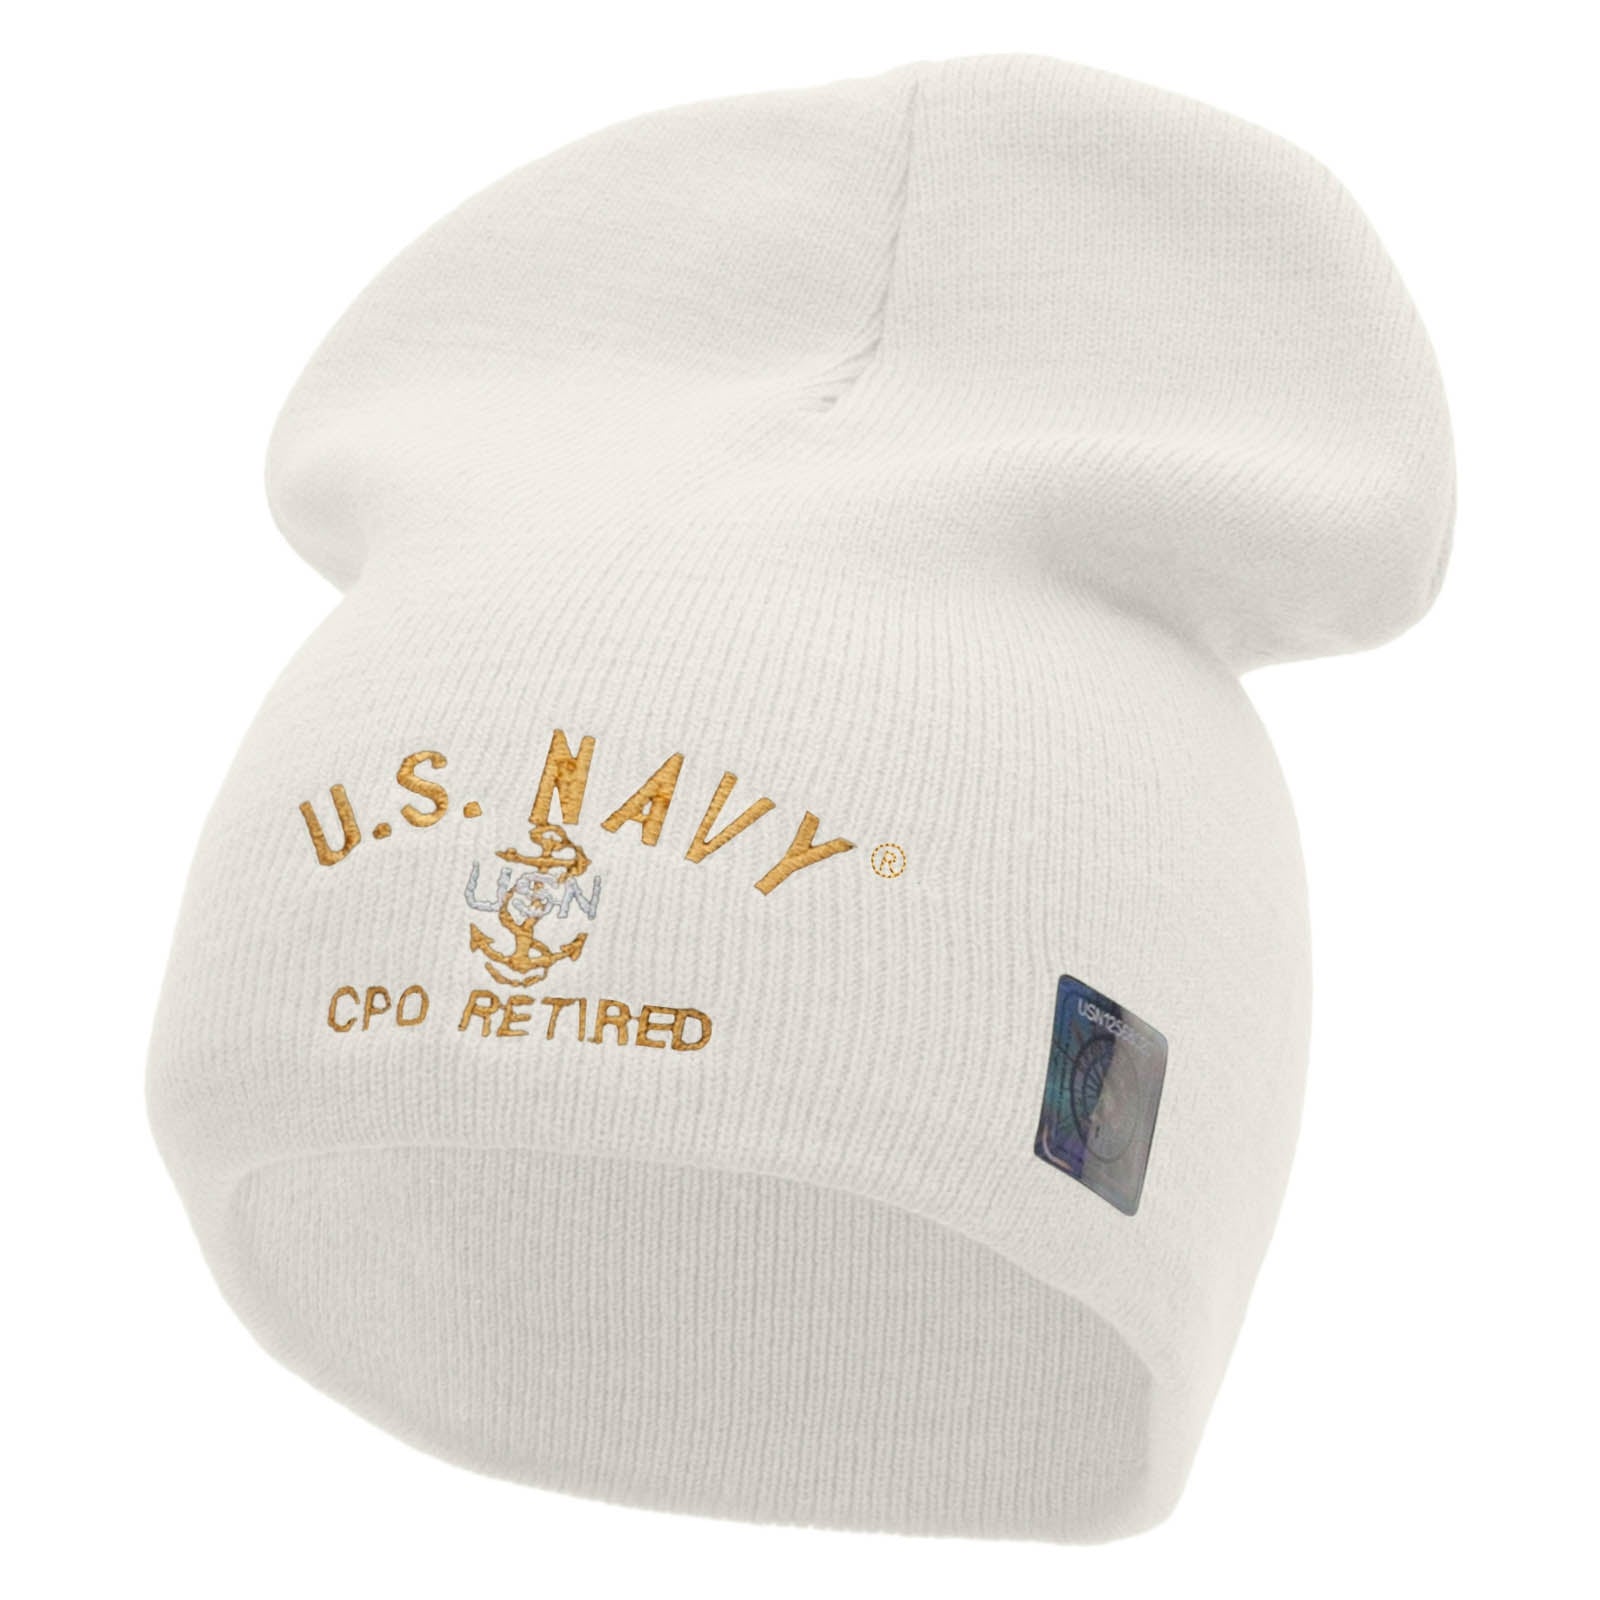 Licensed US Navy CPO Retired Embroidered Short Beanie Made in USA - White OSFM